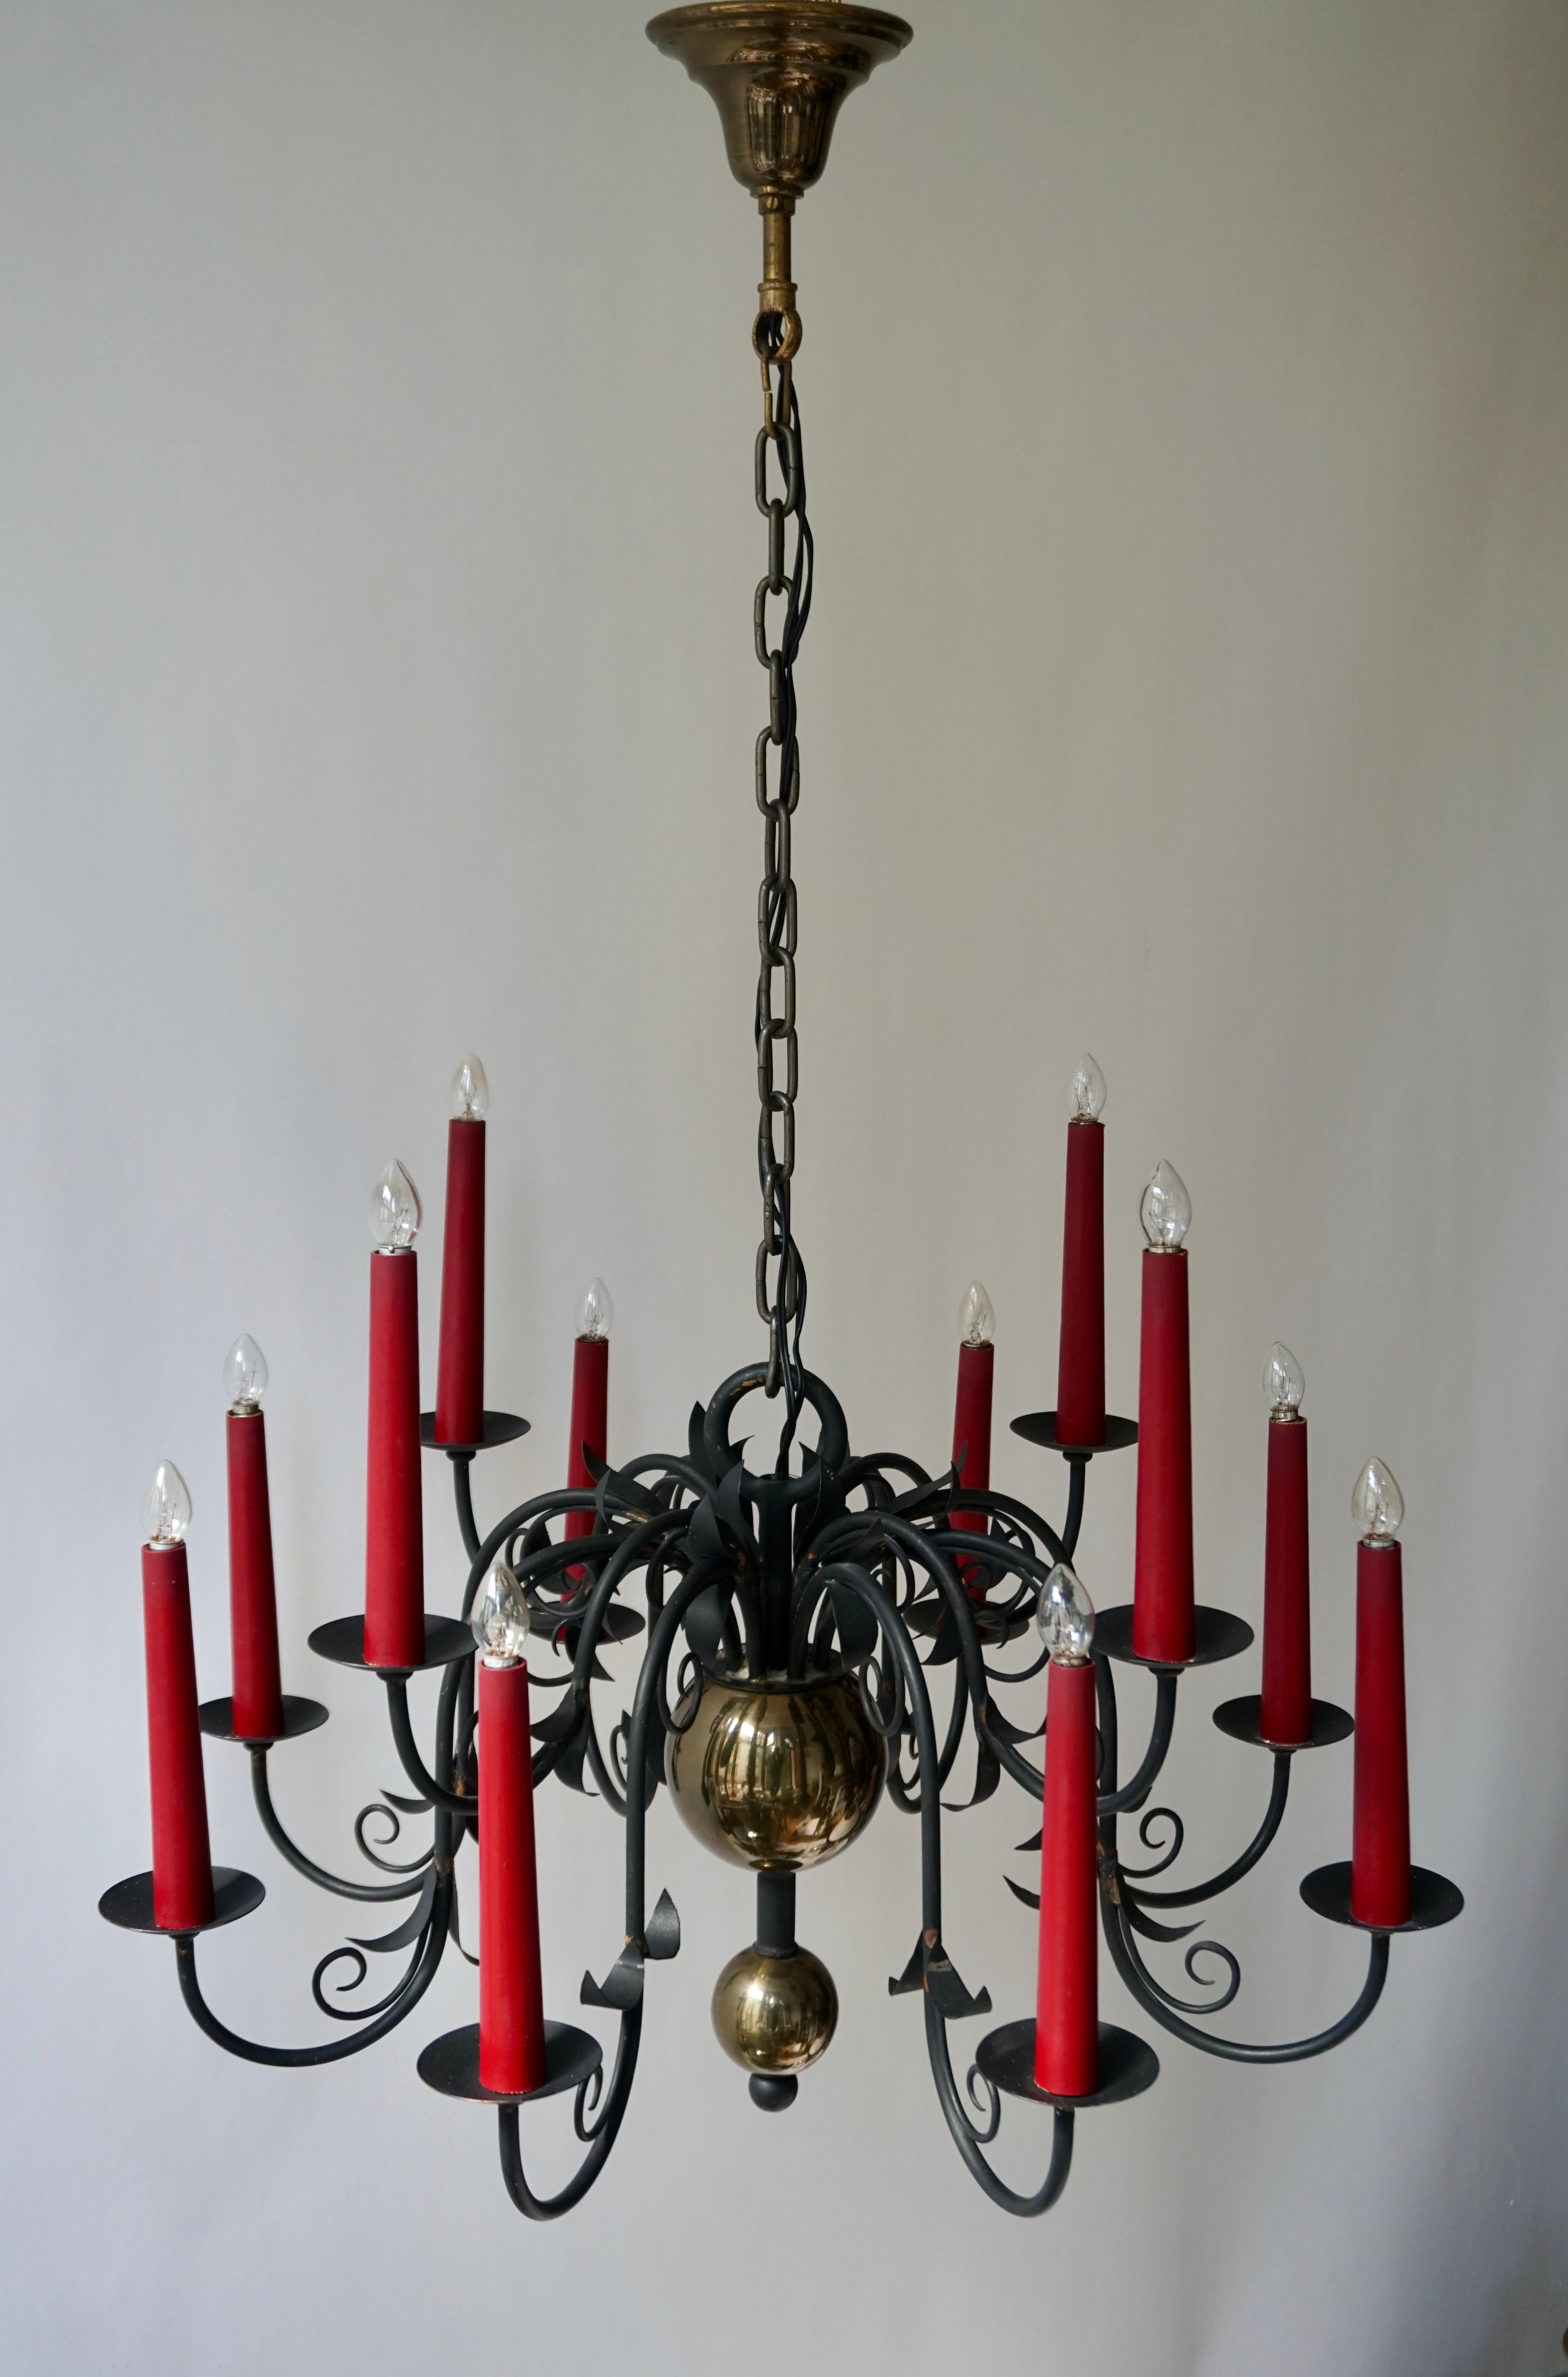 1950s wrought iron Gothic style black chandelier featuring twelve red candle sleeves.
Add the perfect amount of shine to your kitchen over the center island, living room or dining room with this elegant chandelier.

Measures: Diameter 67 cm,